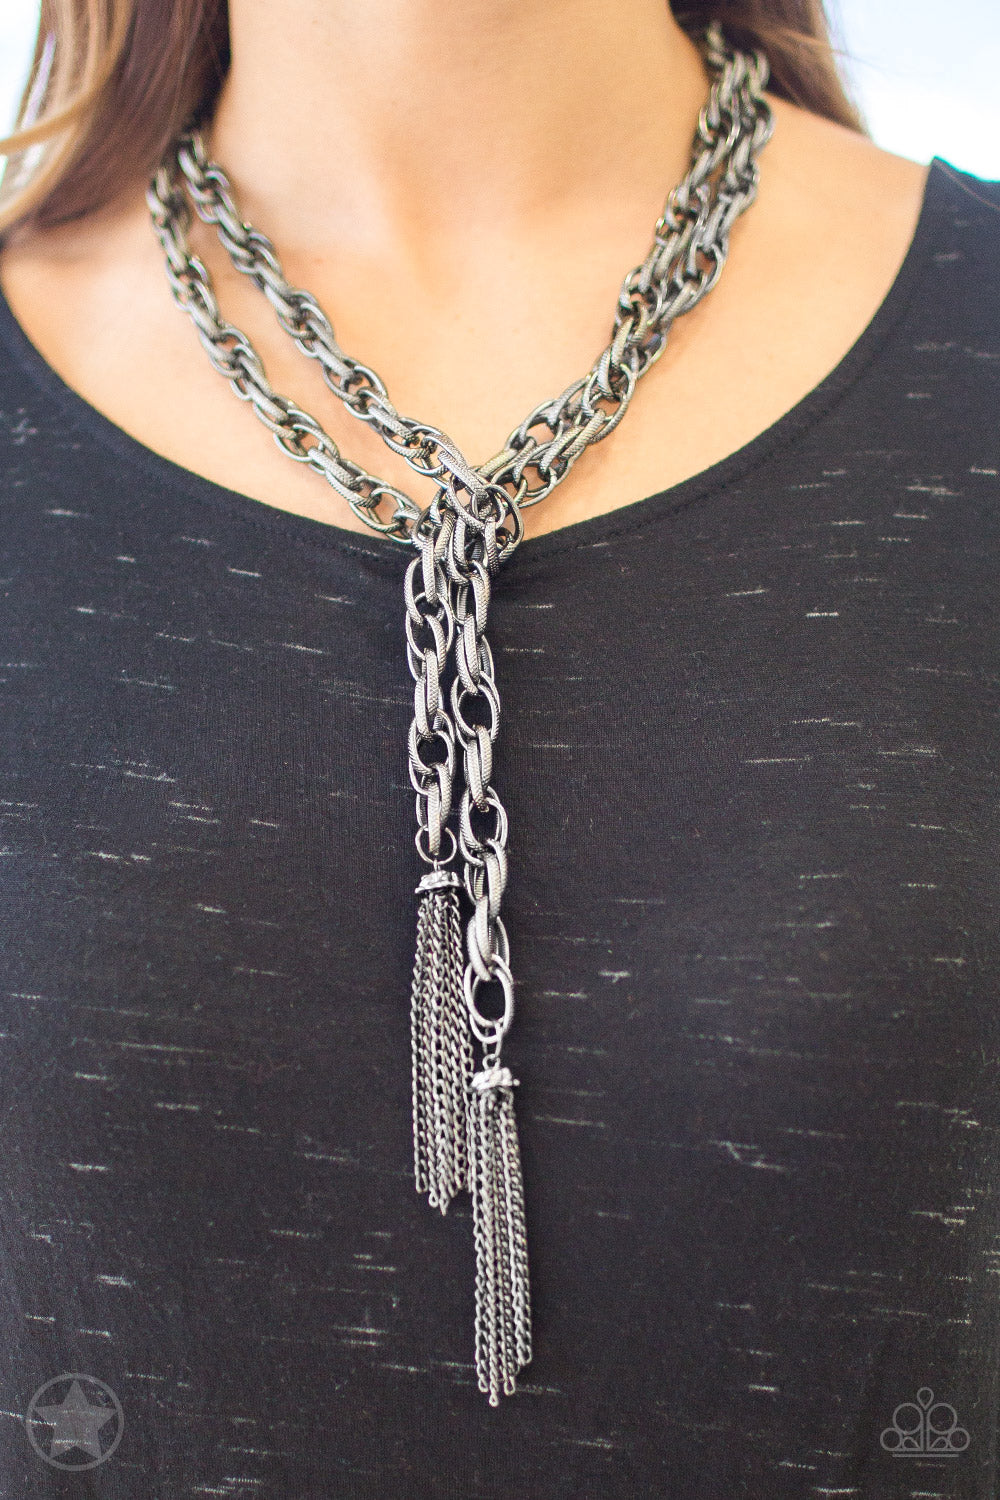 Paparazzi SCARFed For Attention Blockbuster Gunmetal Black Necklace long rope scarf wrap